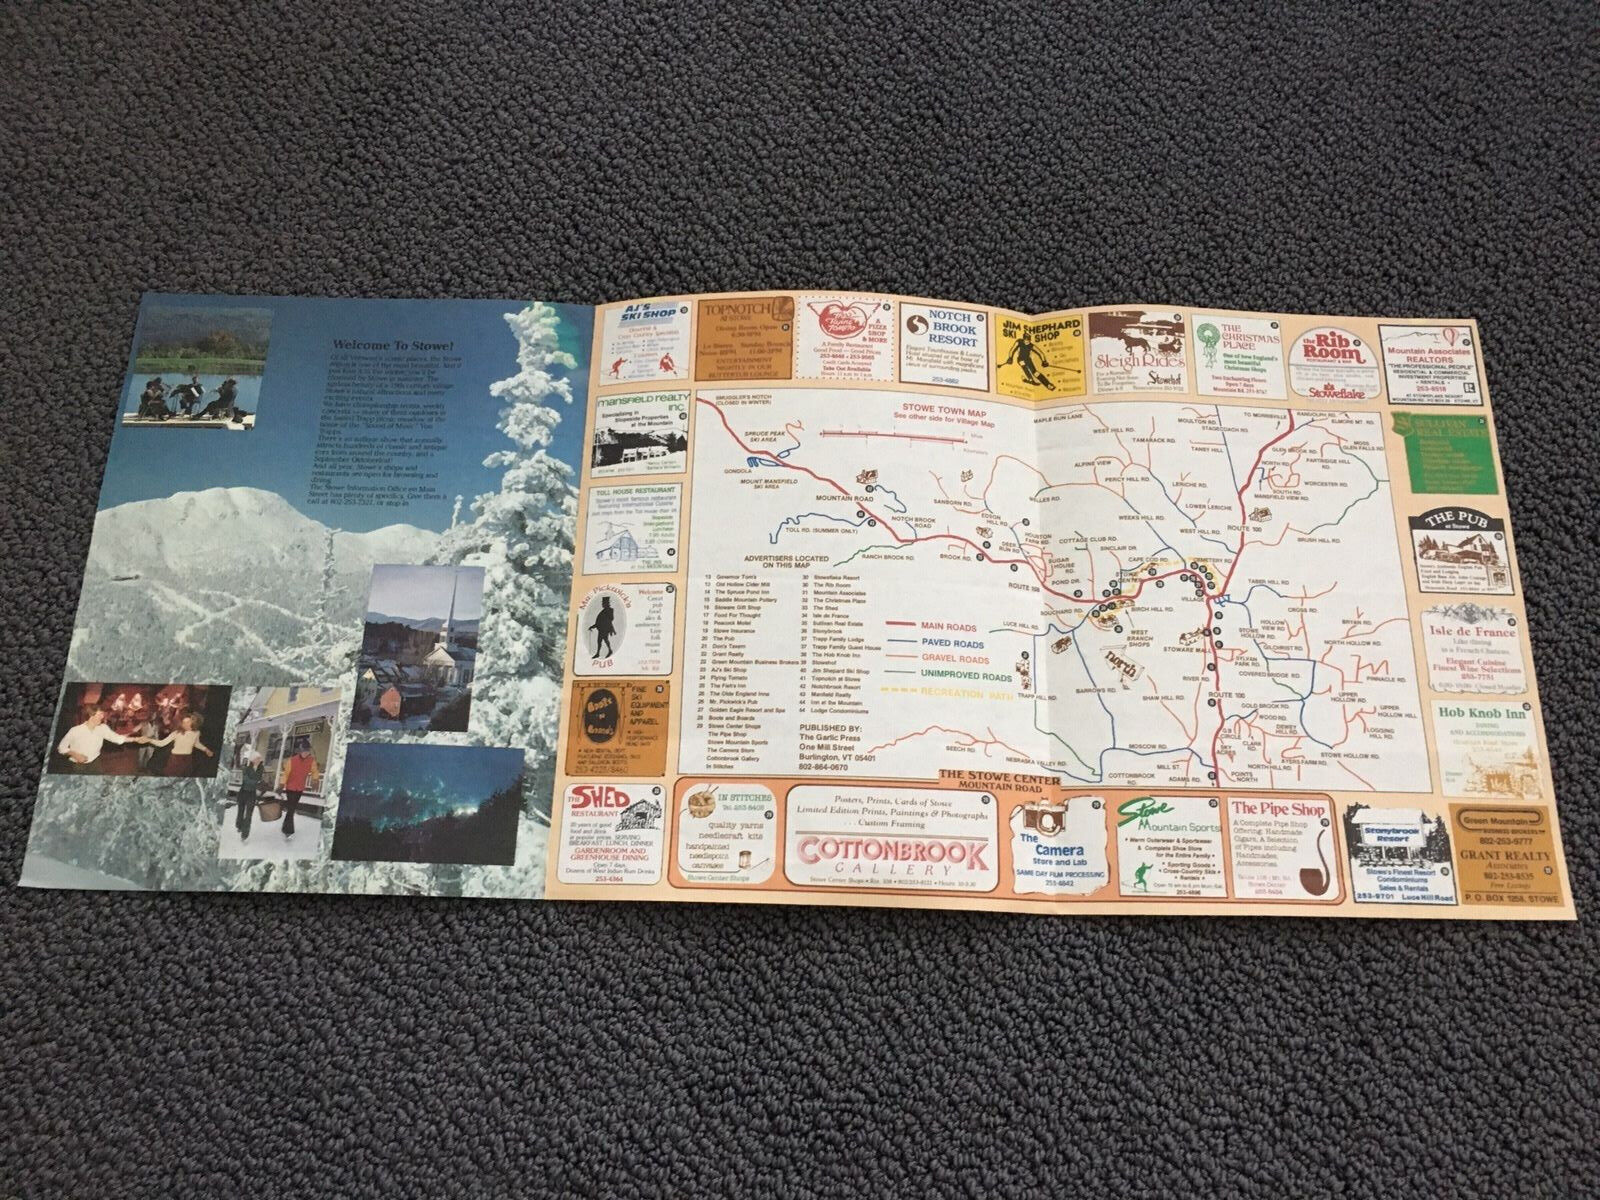 Stowe Mountain Vermont Site Map Winter Spring 1984/85 Skiing Snowboarding Dining